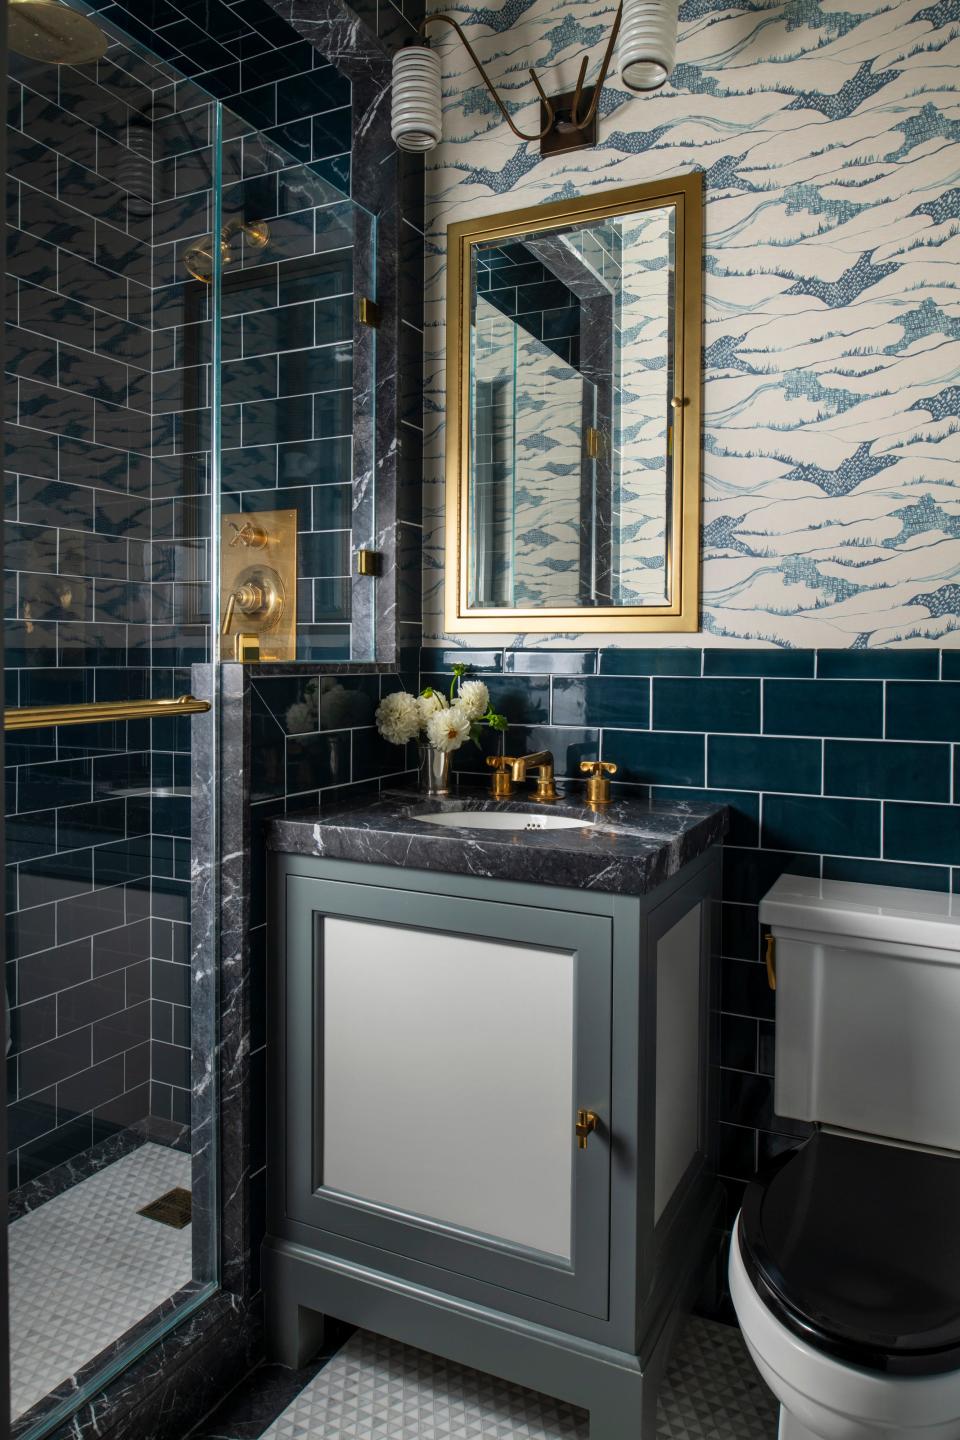 AFTER: The primary bathroom is a brooding escape that harks to the briny deep sea. Dark blue tile by Waterworks and polished brass hardware serve as calming antidotes to one another. The wallpaper is Brook Perdigon’s Toile de Terrain in Lake.